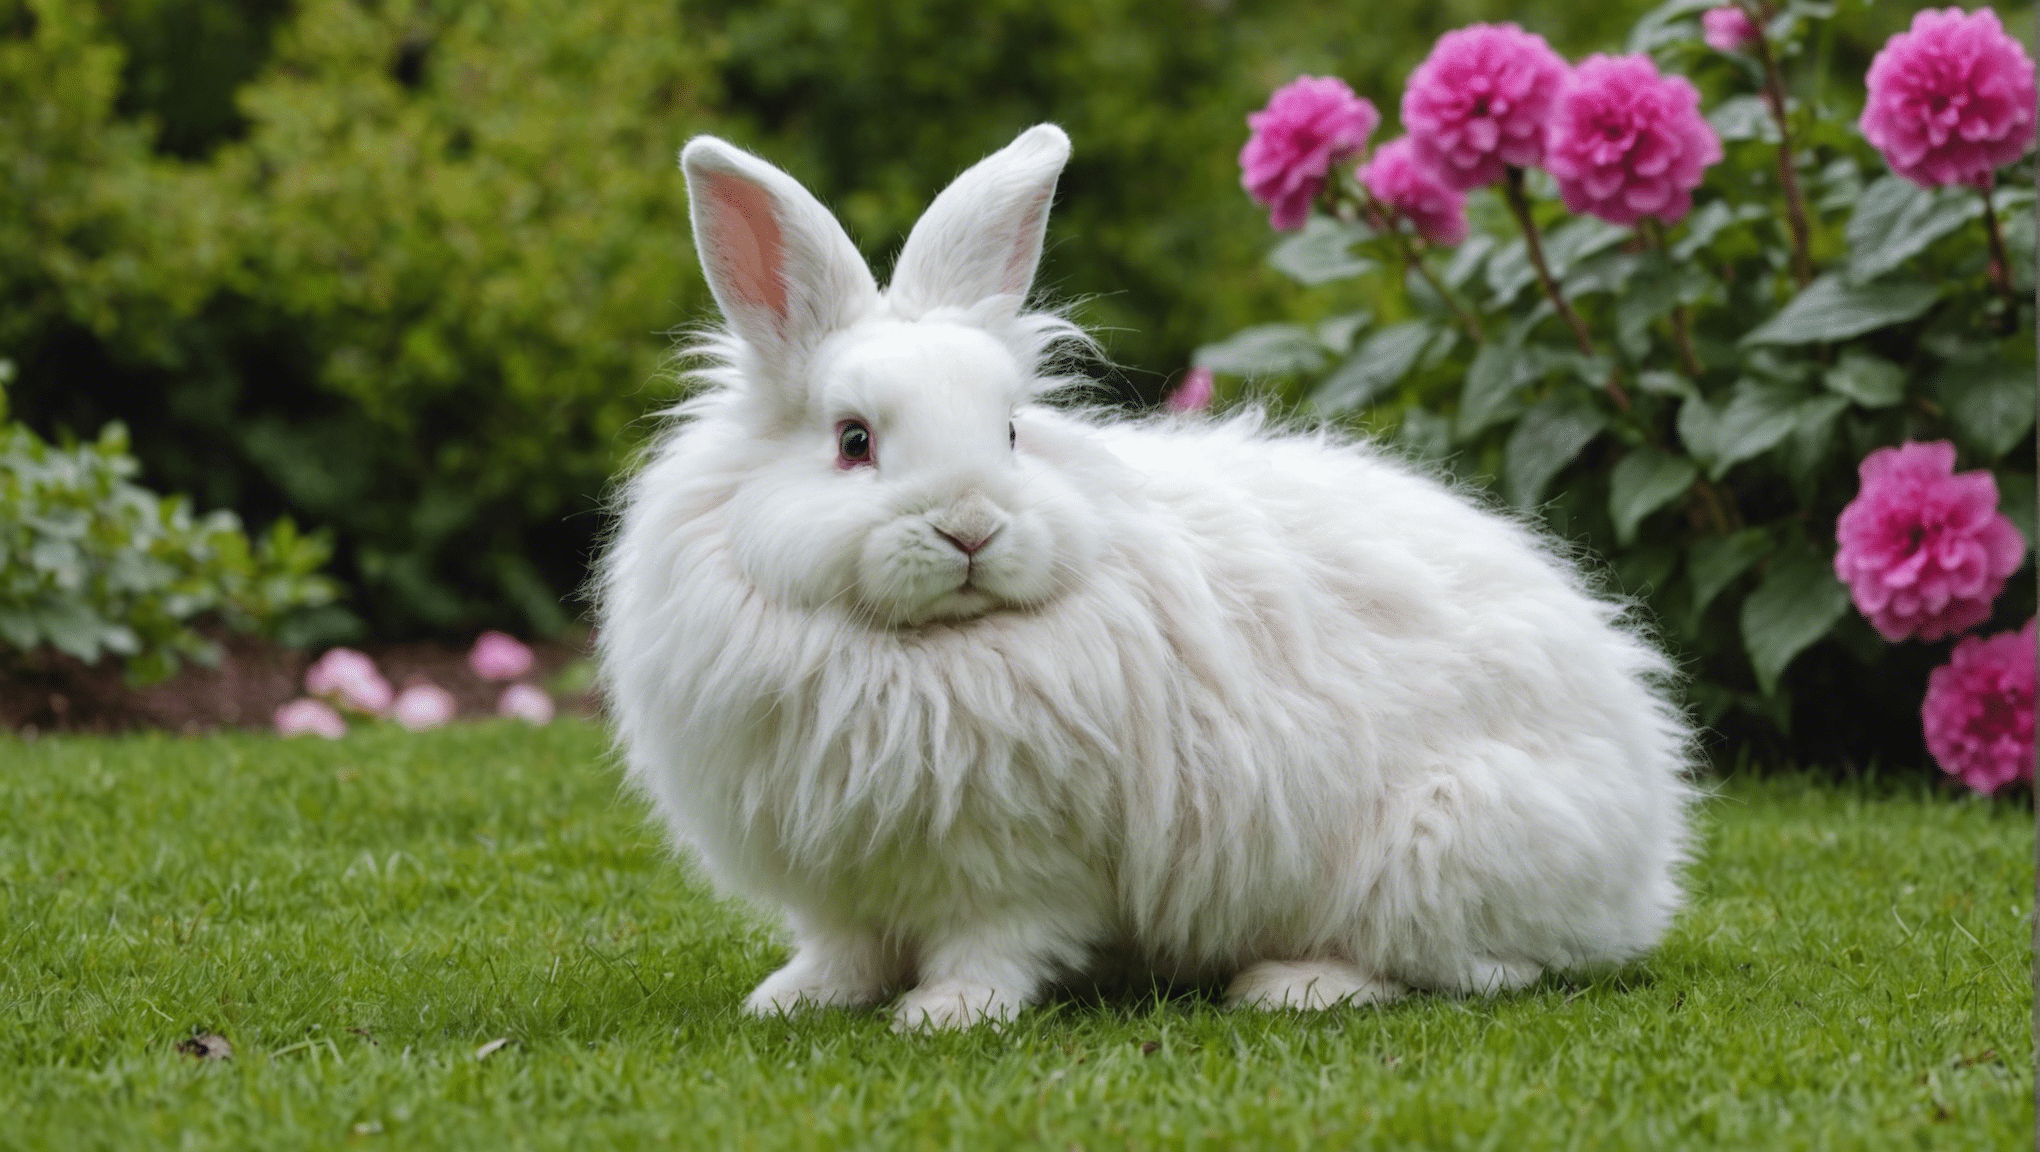 discover the behavior of the angora rabbit in our comprehensive guide. learn about their habits, temperament, and more.